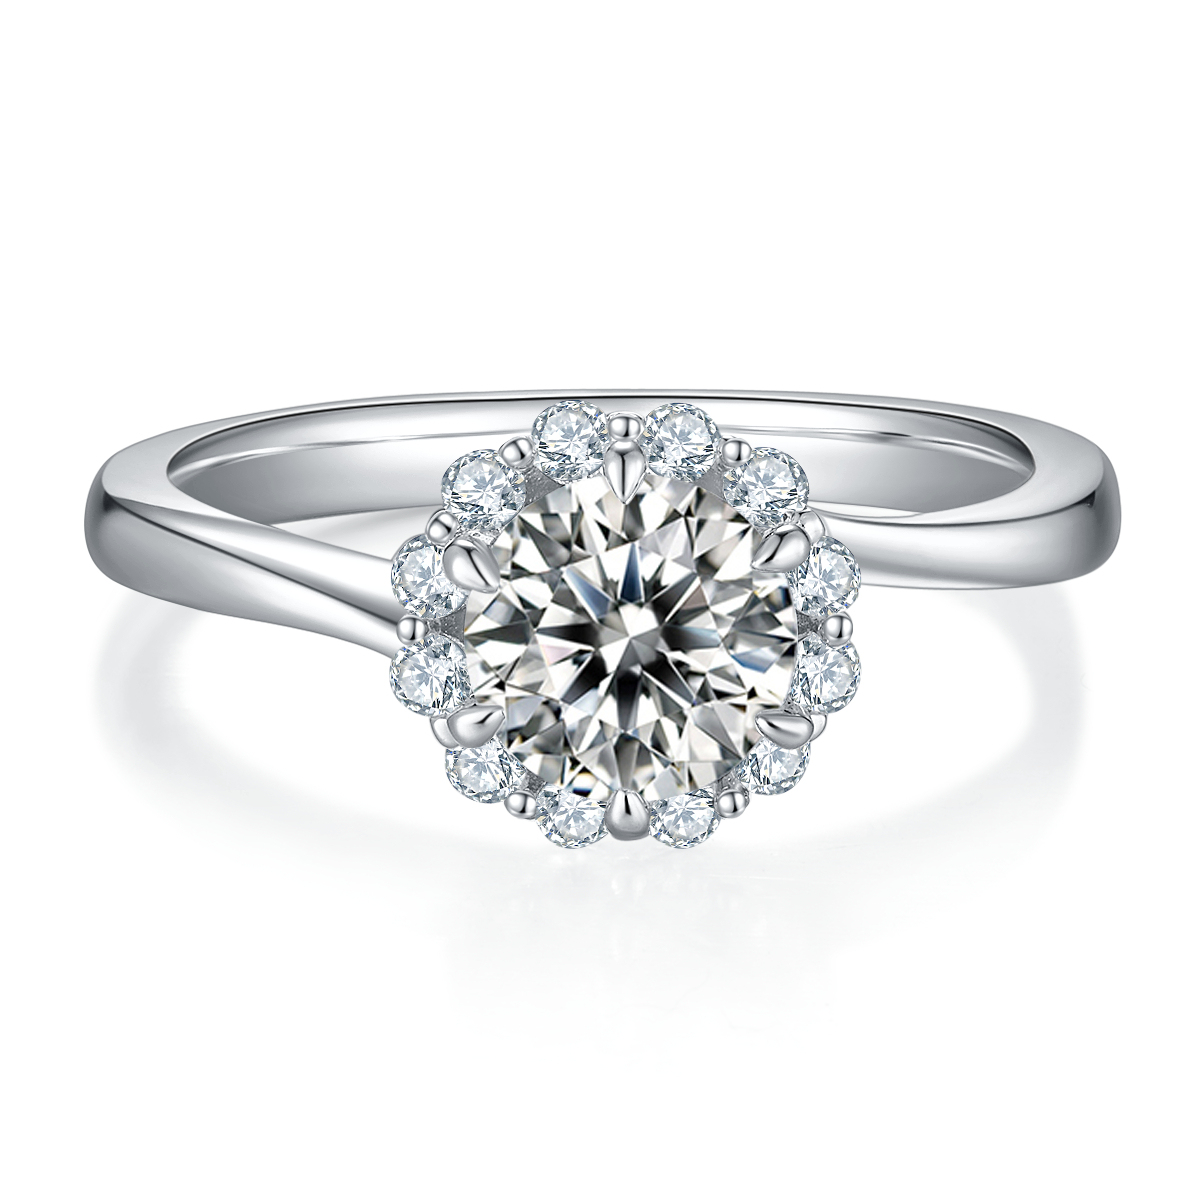 DEDEJILL Spark of Love Sterling Silver Plated White Gold Round Cut Moissanite Halo Ring-1ct D Grade